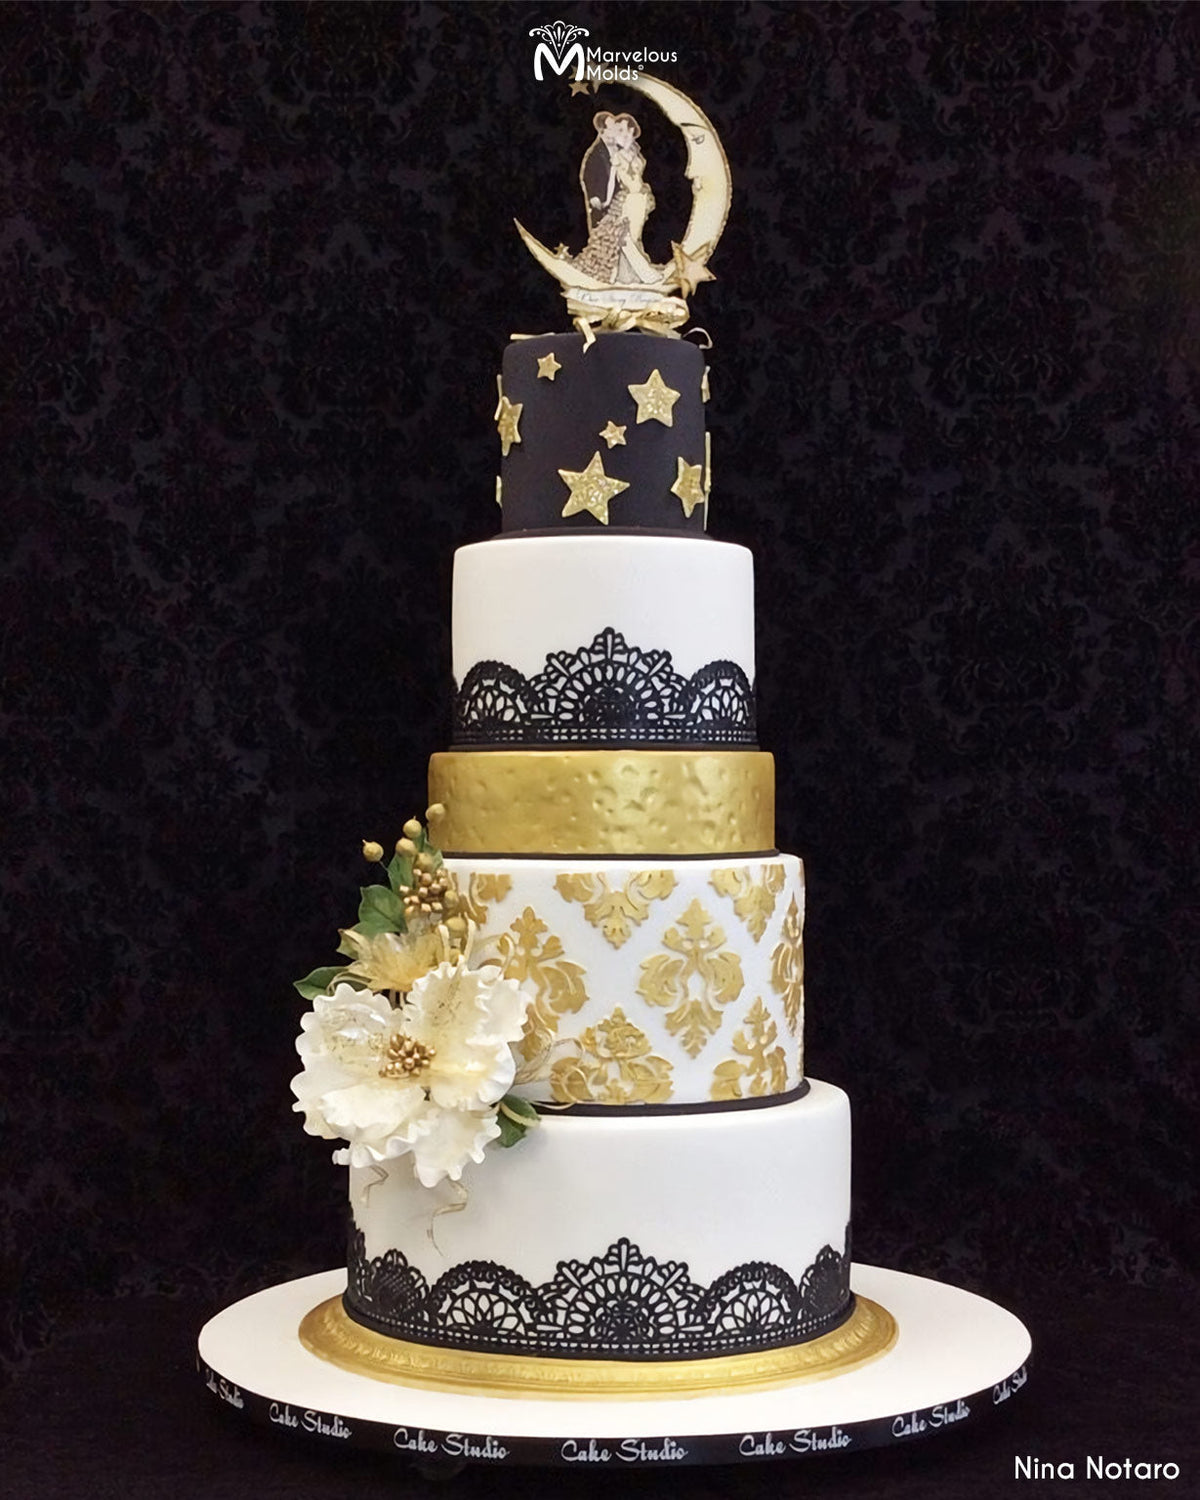 Moon and Stars Wedding Cake Decorated Using Marvelous Molds Damask Pattern Silicone Onlay